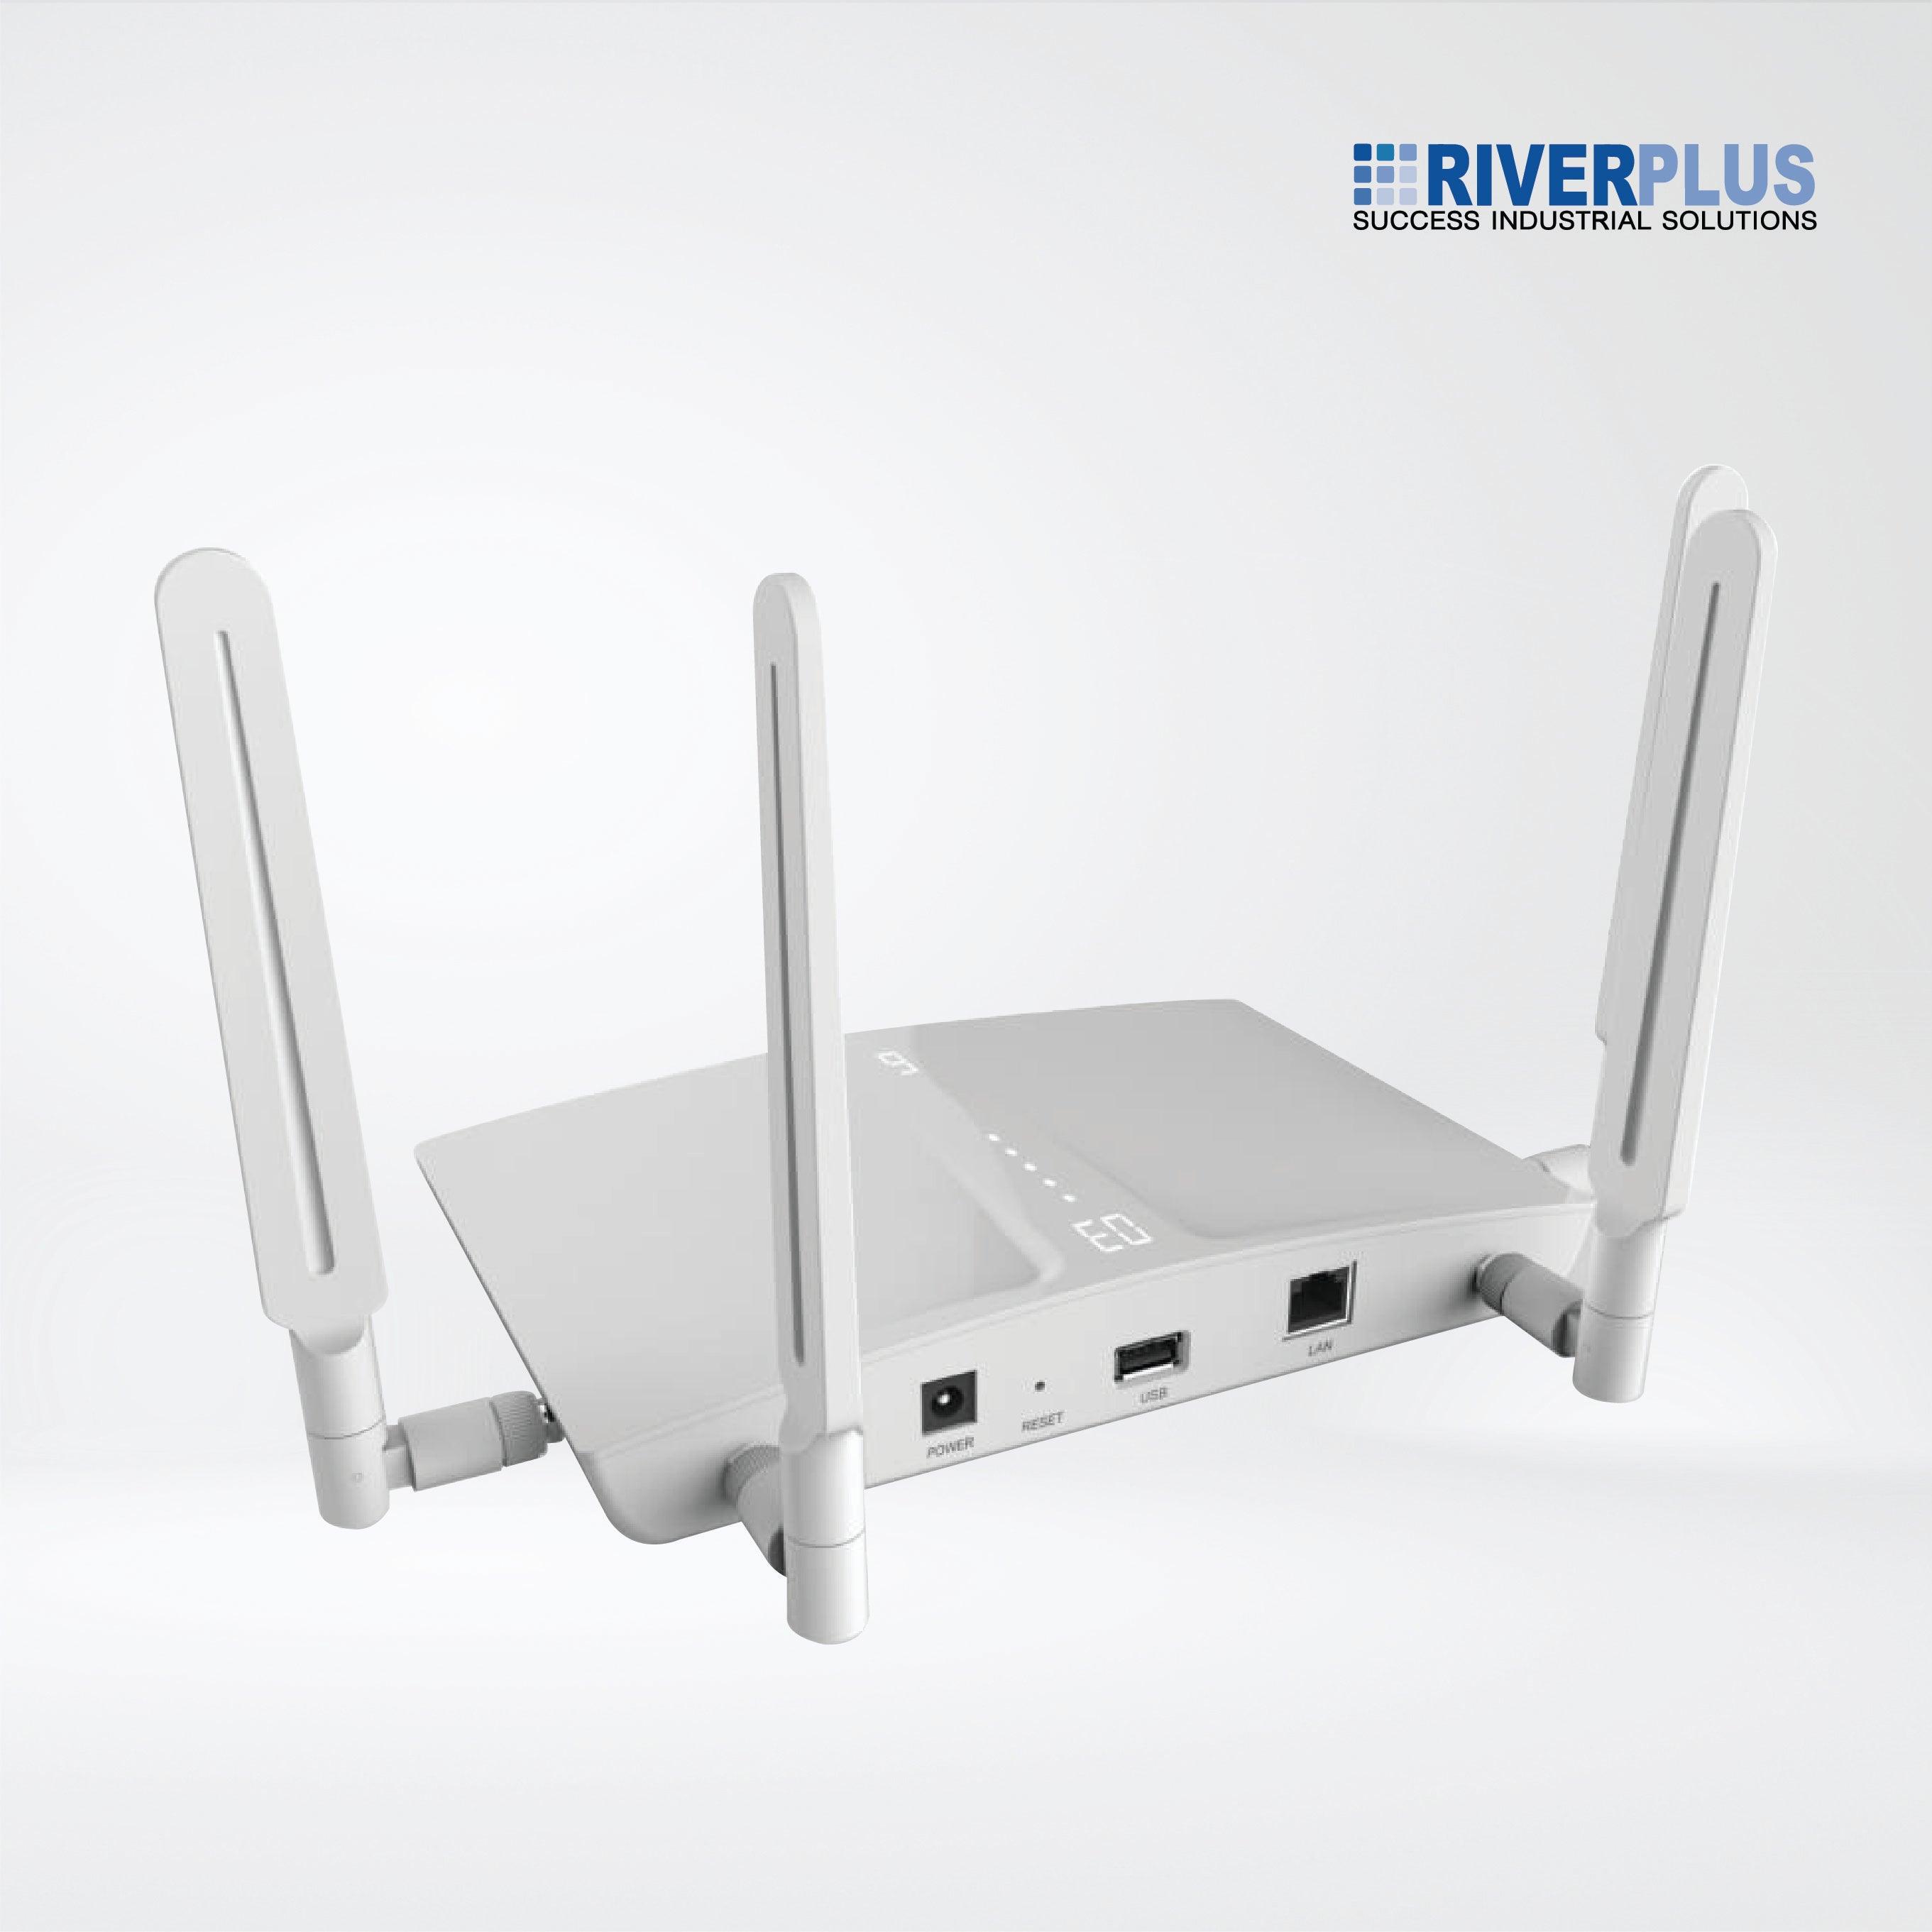 HS_C09851 ESL Access Point , 3rd generation, support EPD&LCD - Riverplus